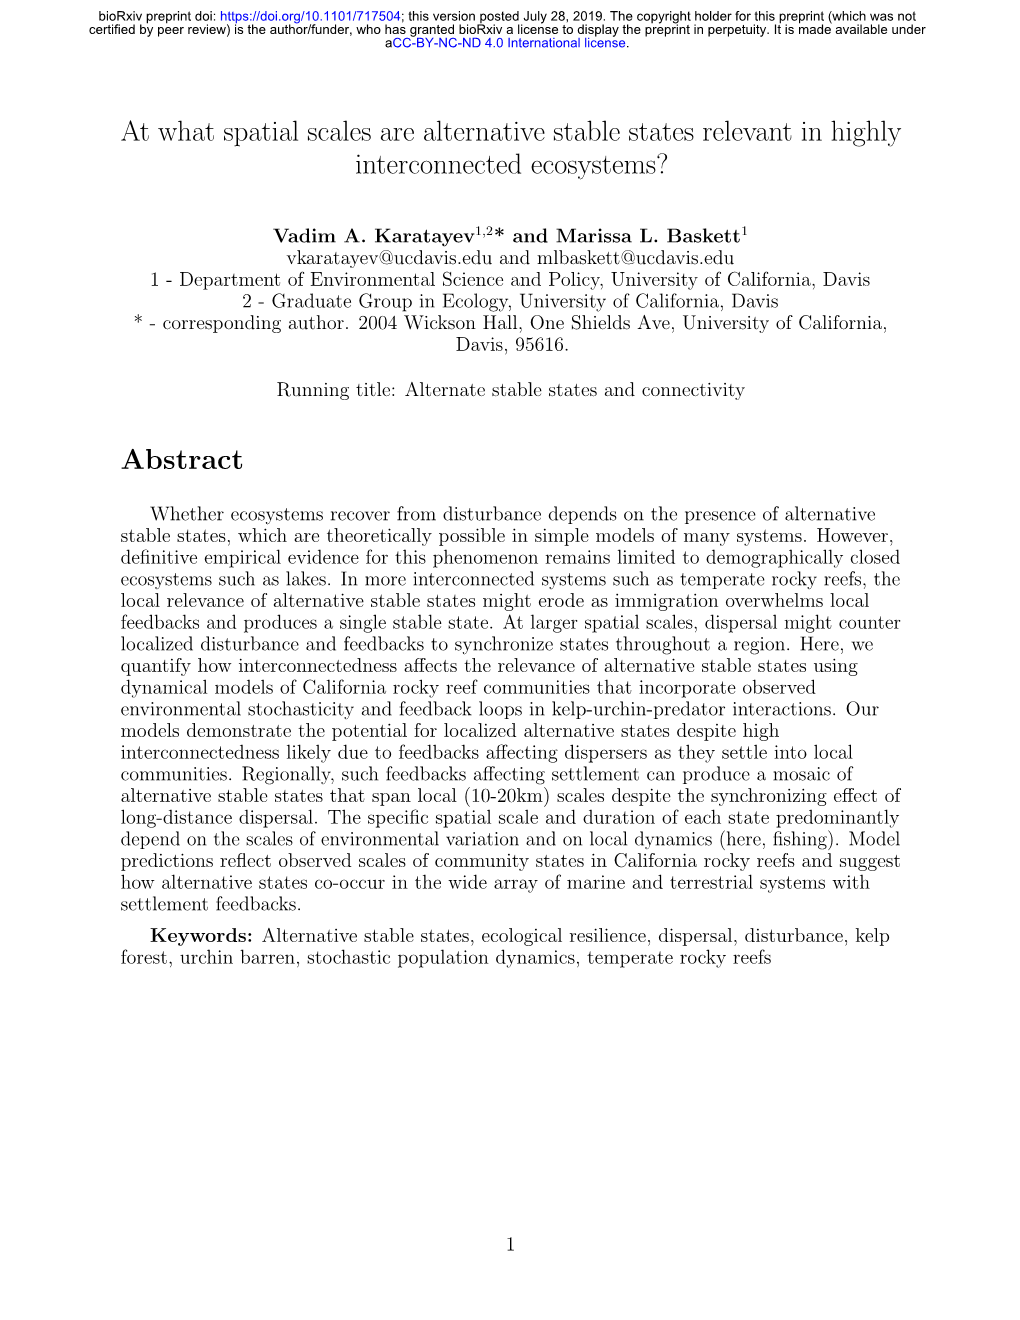 At What Spatial Scales Are Alternative Stable States Relevant in Highly Interconnected Ecosystems?